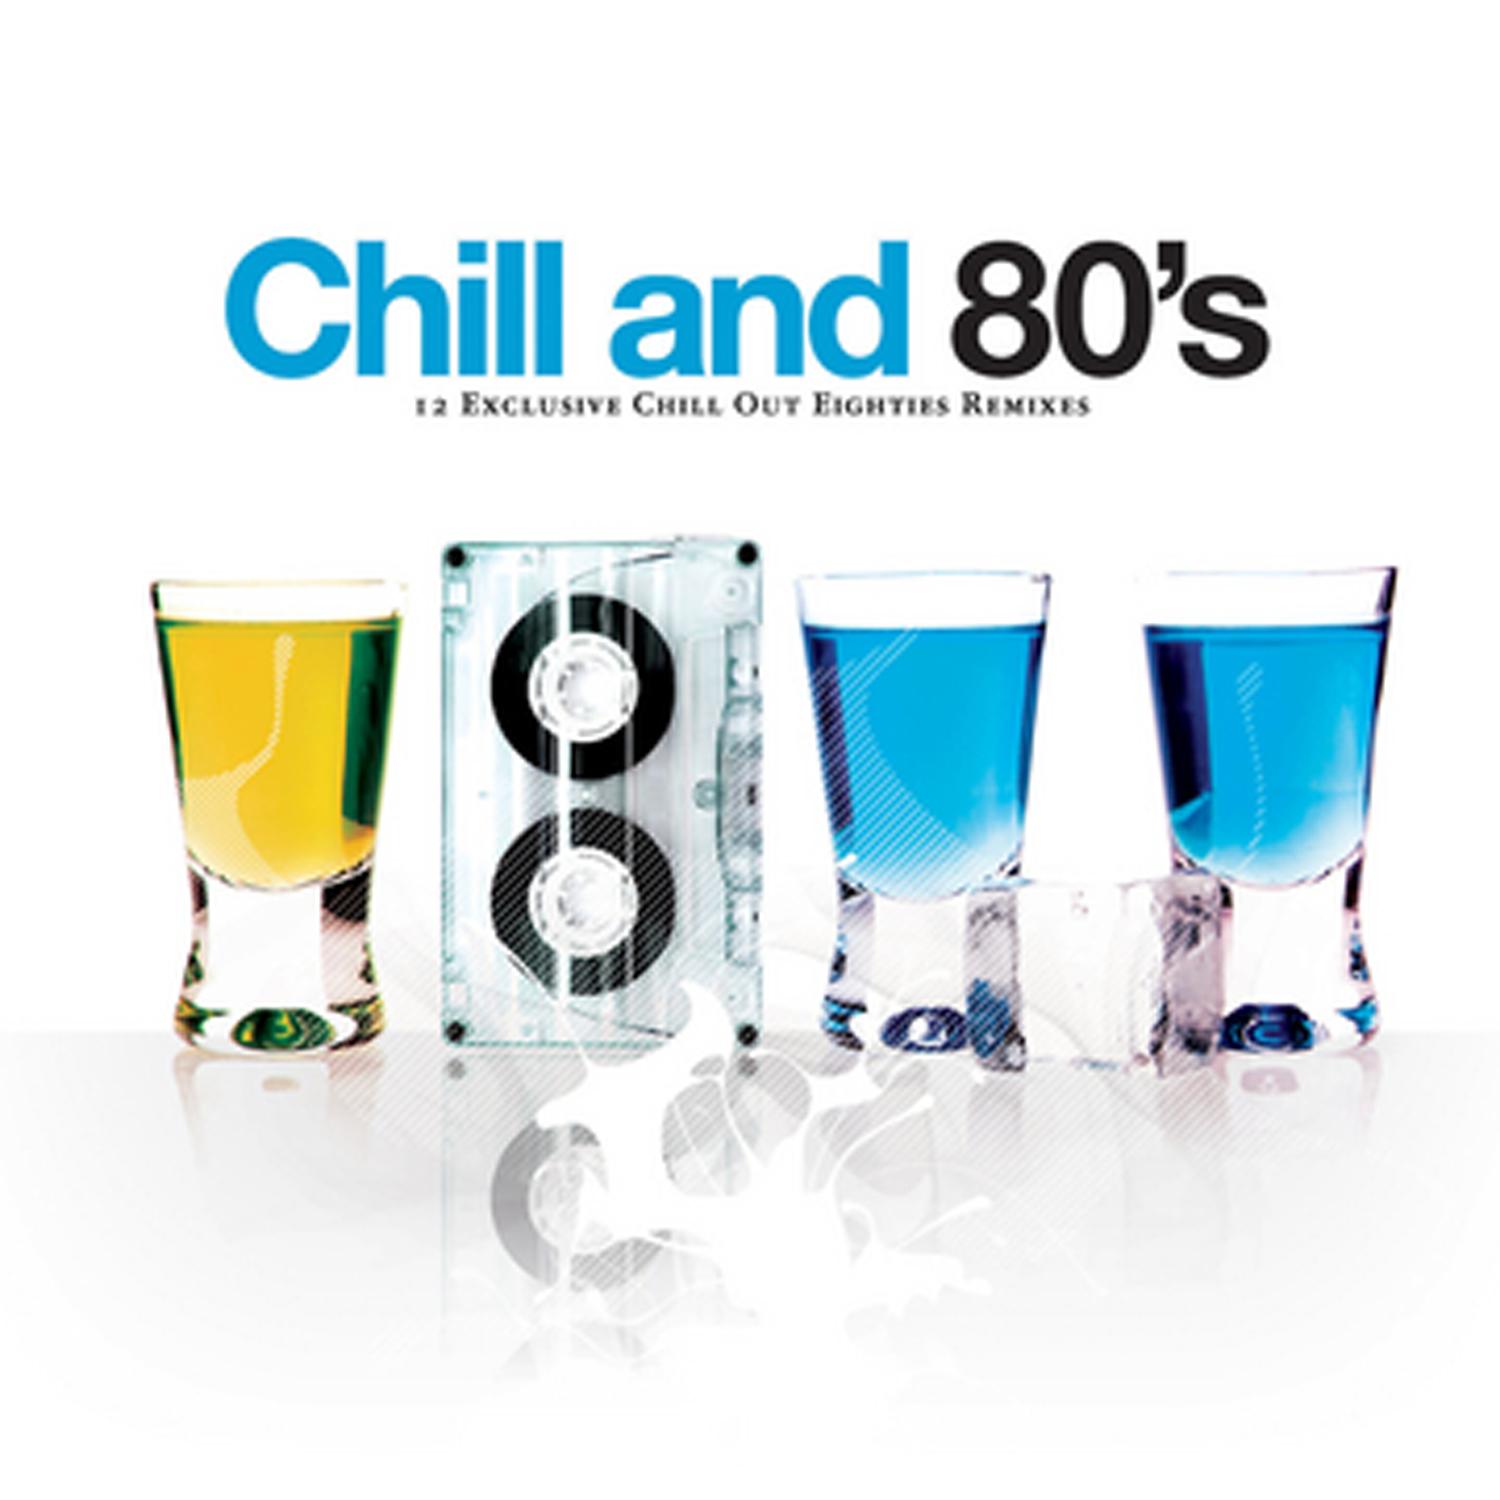 Chill And 80's - 12 Exclusive Chill Out Eighties Remixes